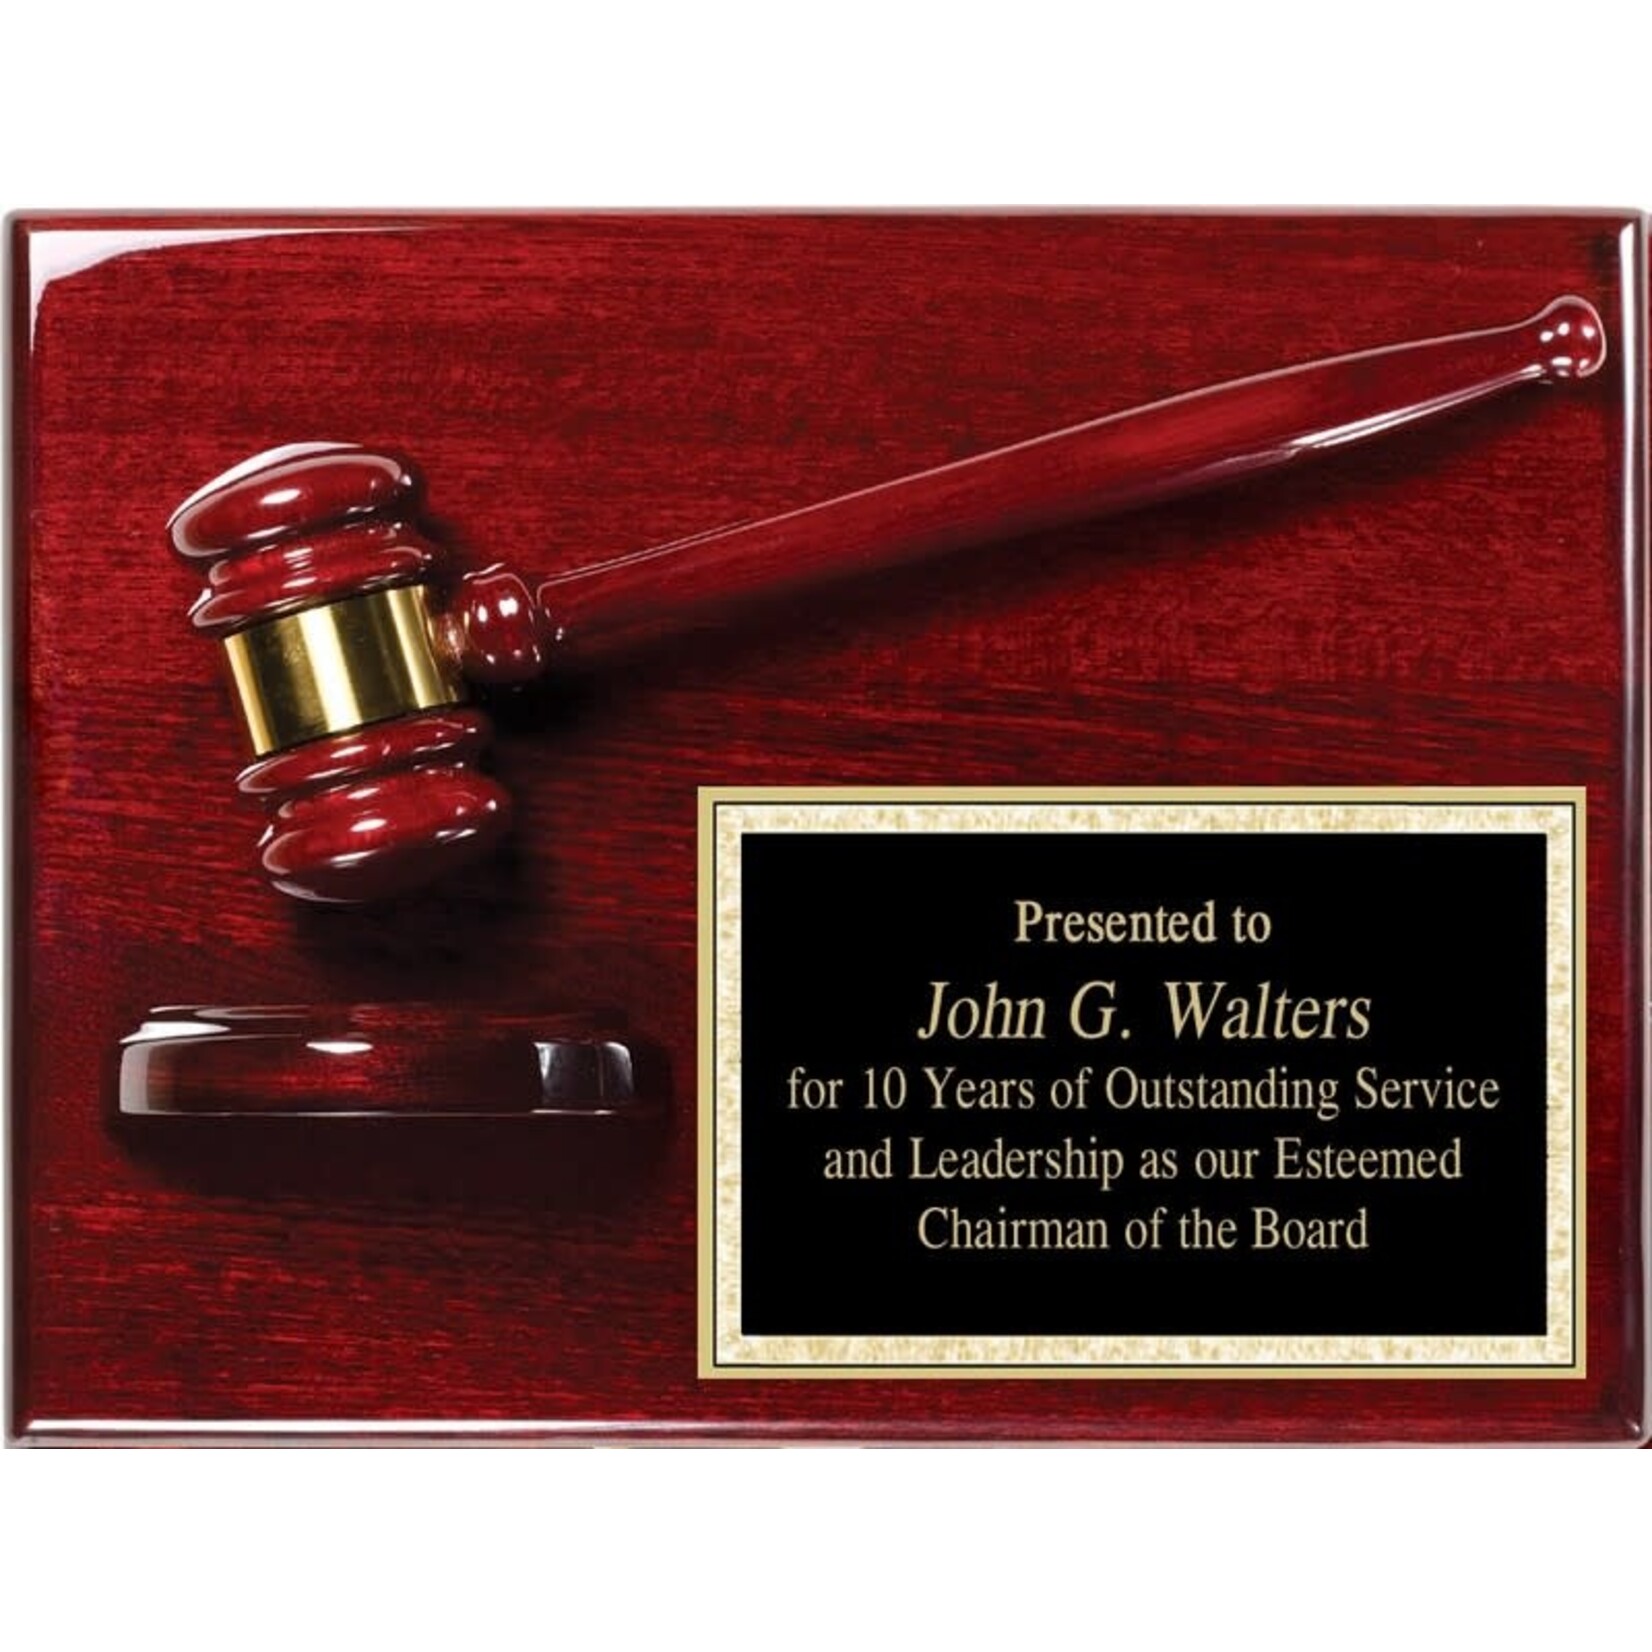 Marco AGP-40PL Rosewood Finish Gavel Plaque includes engraving